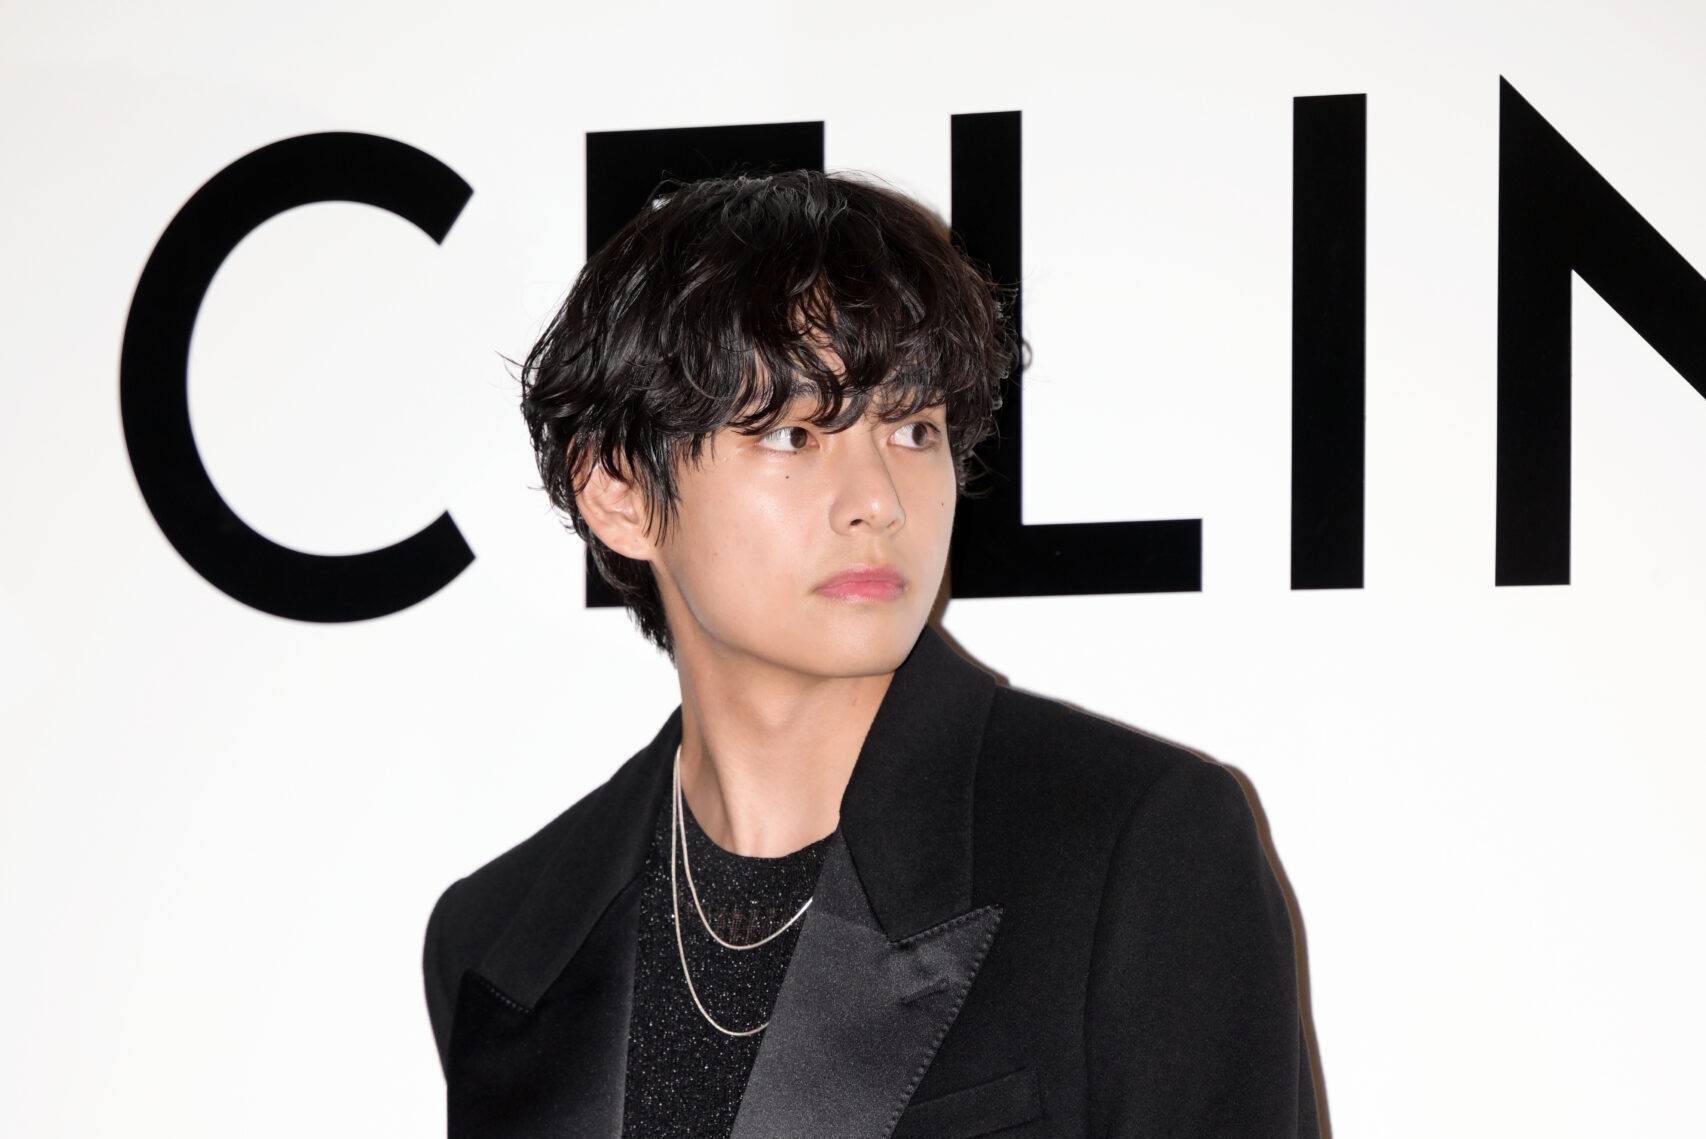 South Korean singer Kim Tae-hyung, a.k.a V of BTS is seen at the "CELINE" pop-up store opening event at The Hyundai Yeouido on March 30, 2023 in Seoul, South Korea [Photo by The Chosunilbo JNS/Imazins via Getty Images]